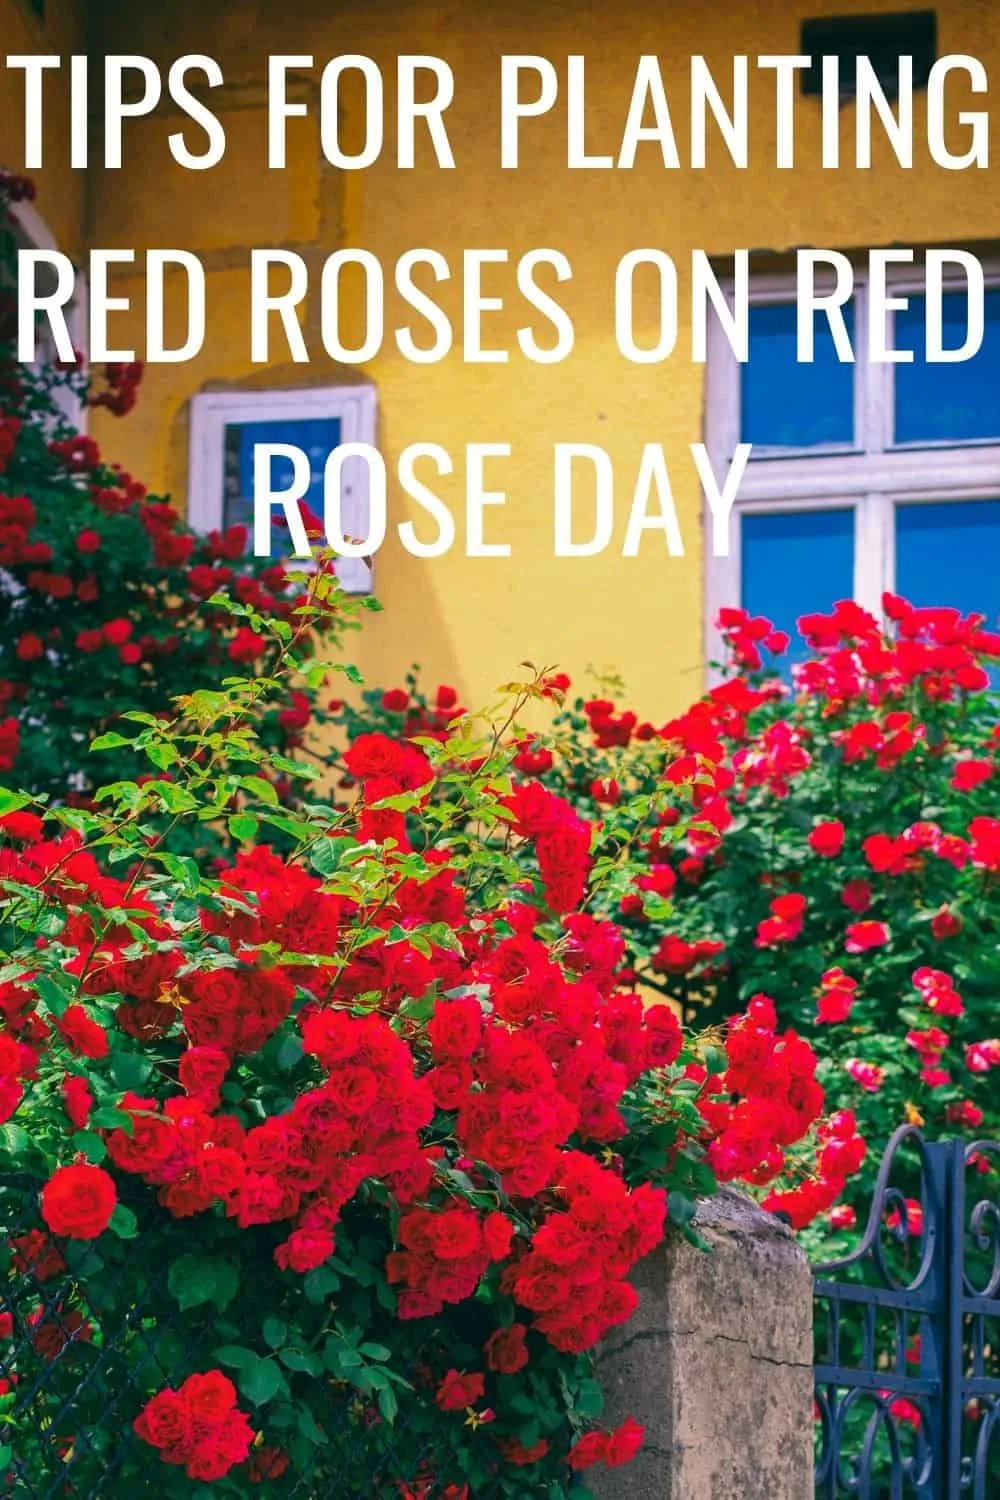 tips for planting red roses on red rose day